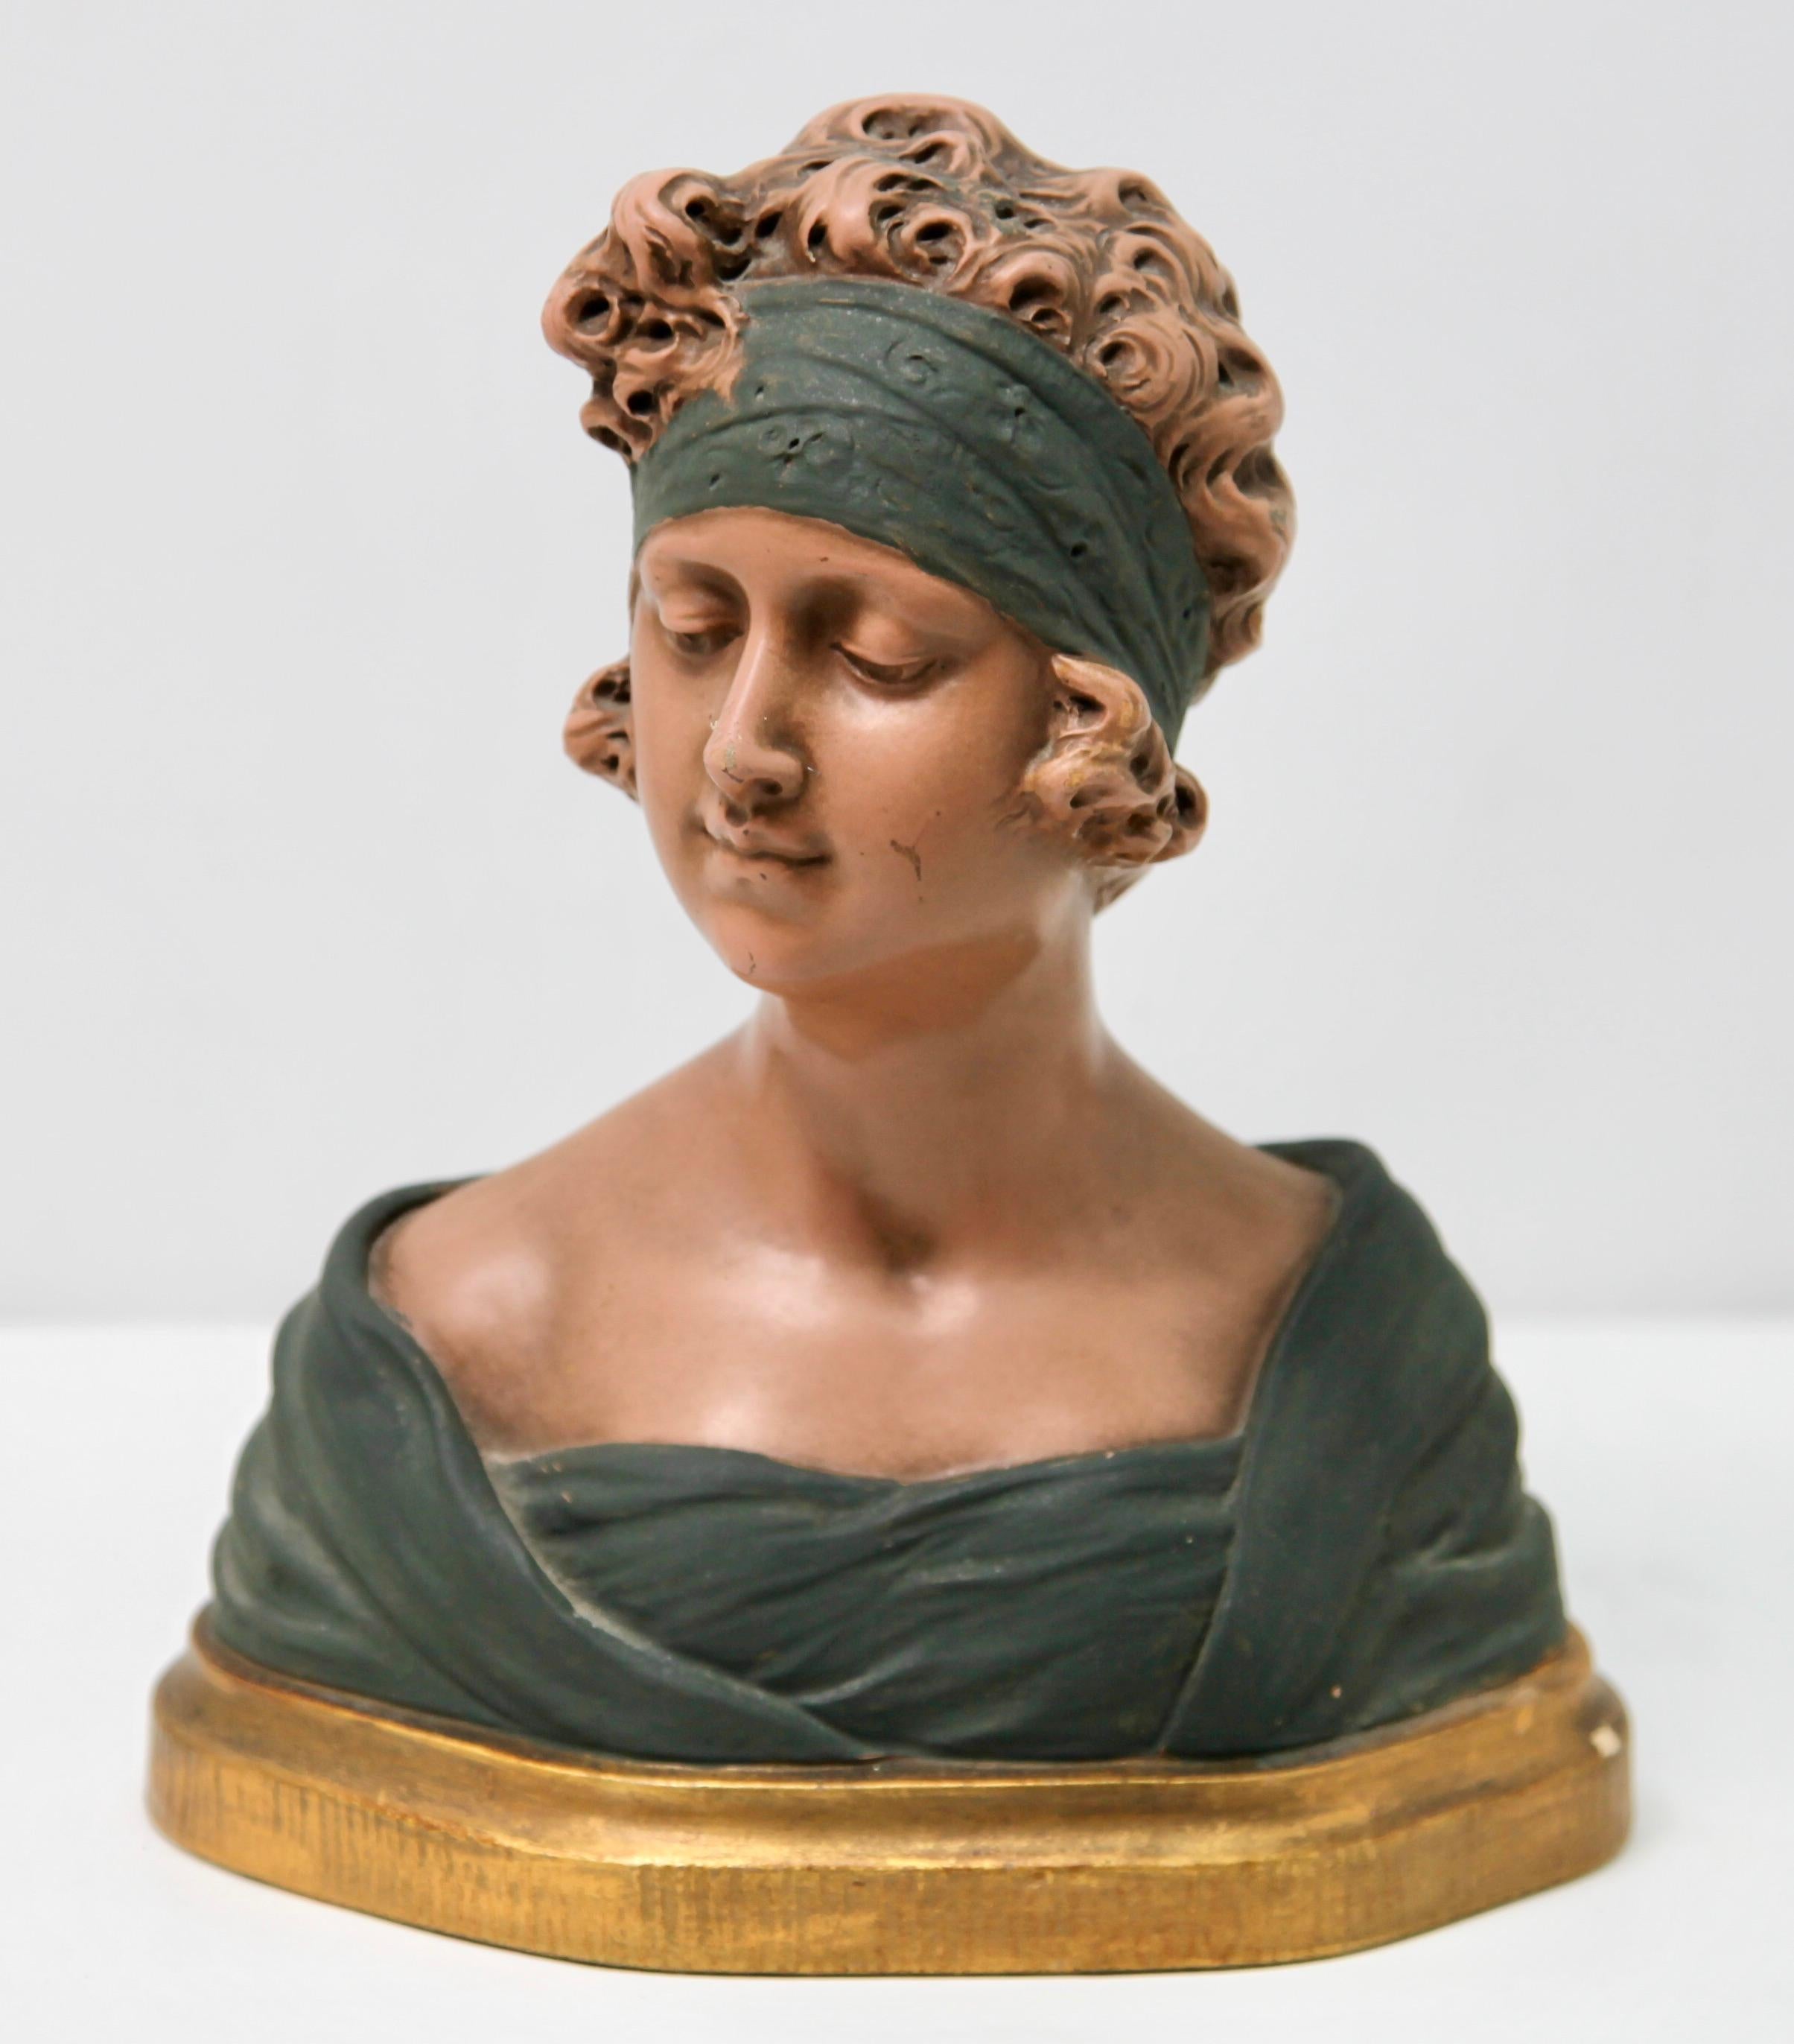 Auguste Henri Carli (1868-1930)-bust in terracotta, France, Belgium, early 20th century

Signed A. Carli.
Auguste Carli is a French sculpture, whose work along with that of his brother was represented in Brussels.
This bust is in Belgium in a